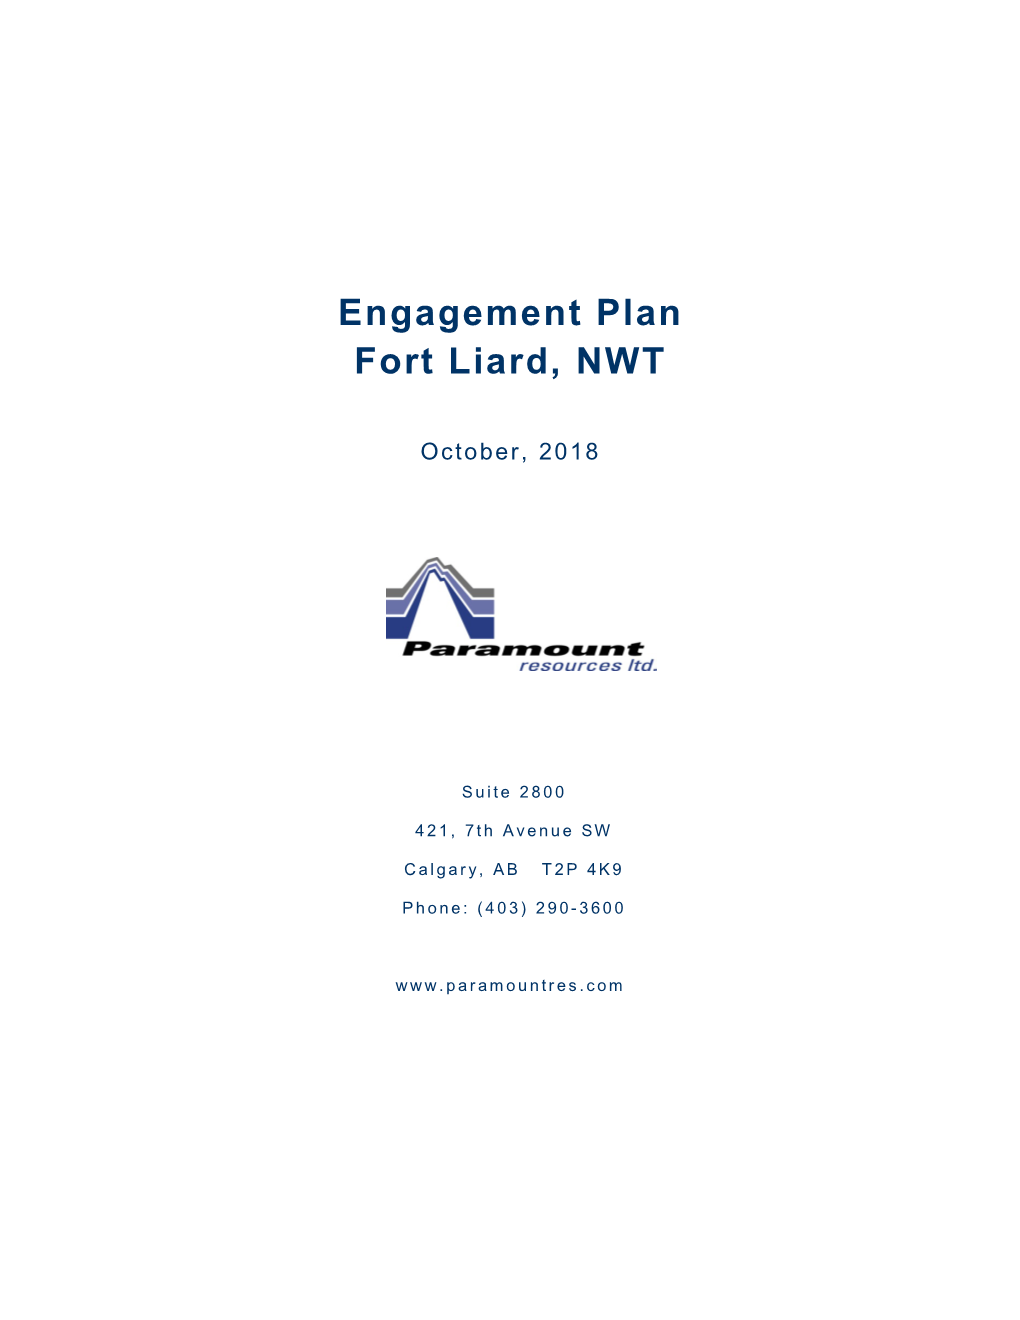 Engagement Plan Fort Liard, NWT